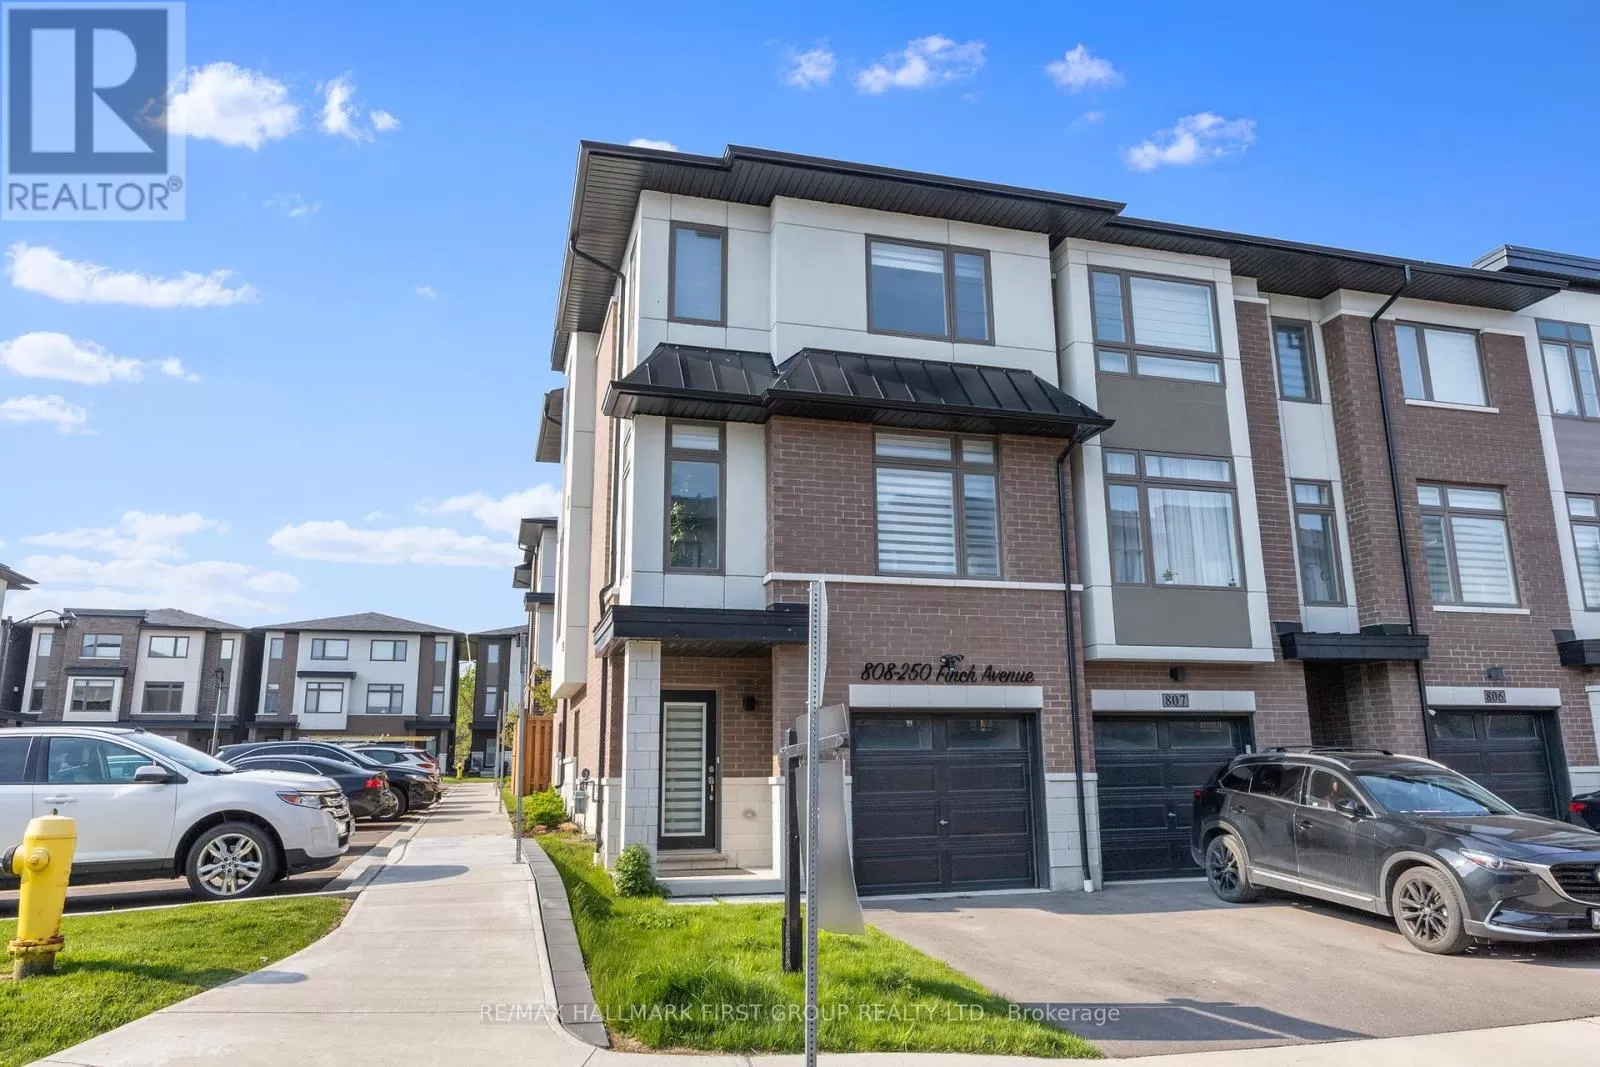 Row / Townhouse for rent: 808 - 250 Finch Avenue, Pickering, Ontario L1V 0G6